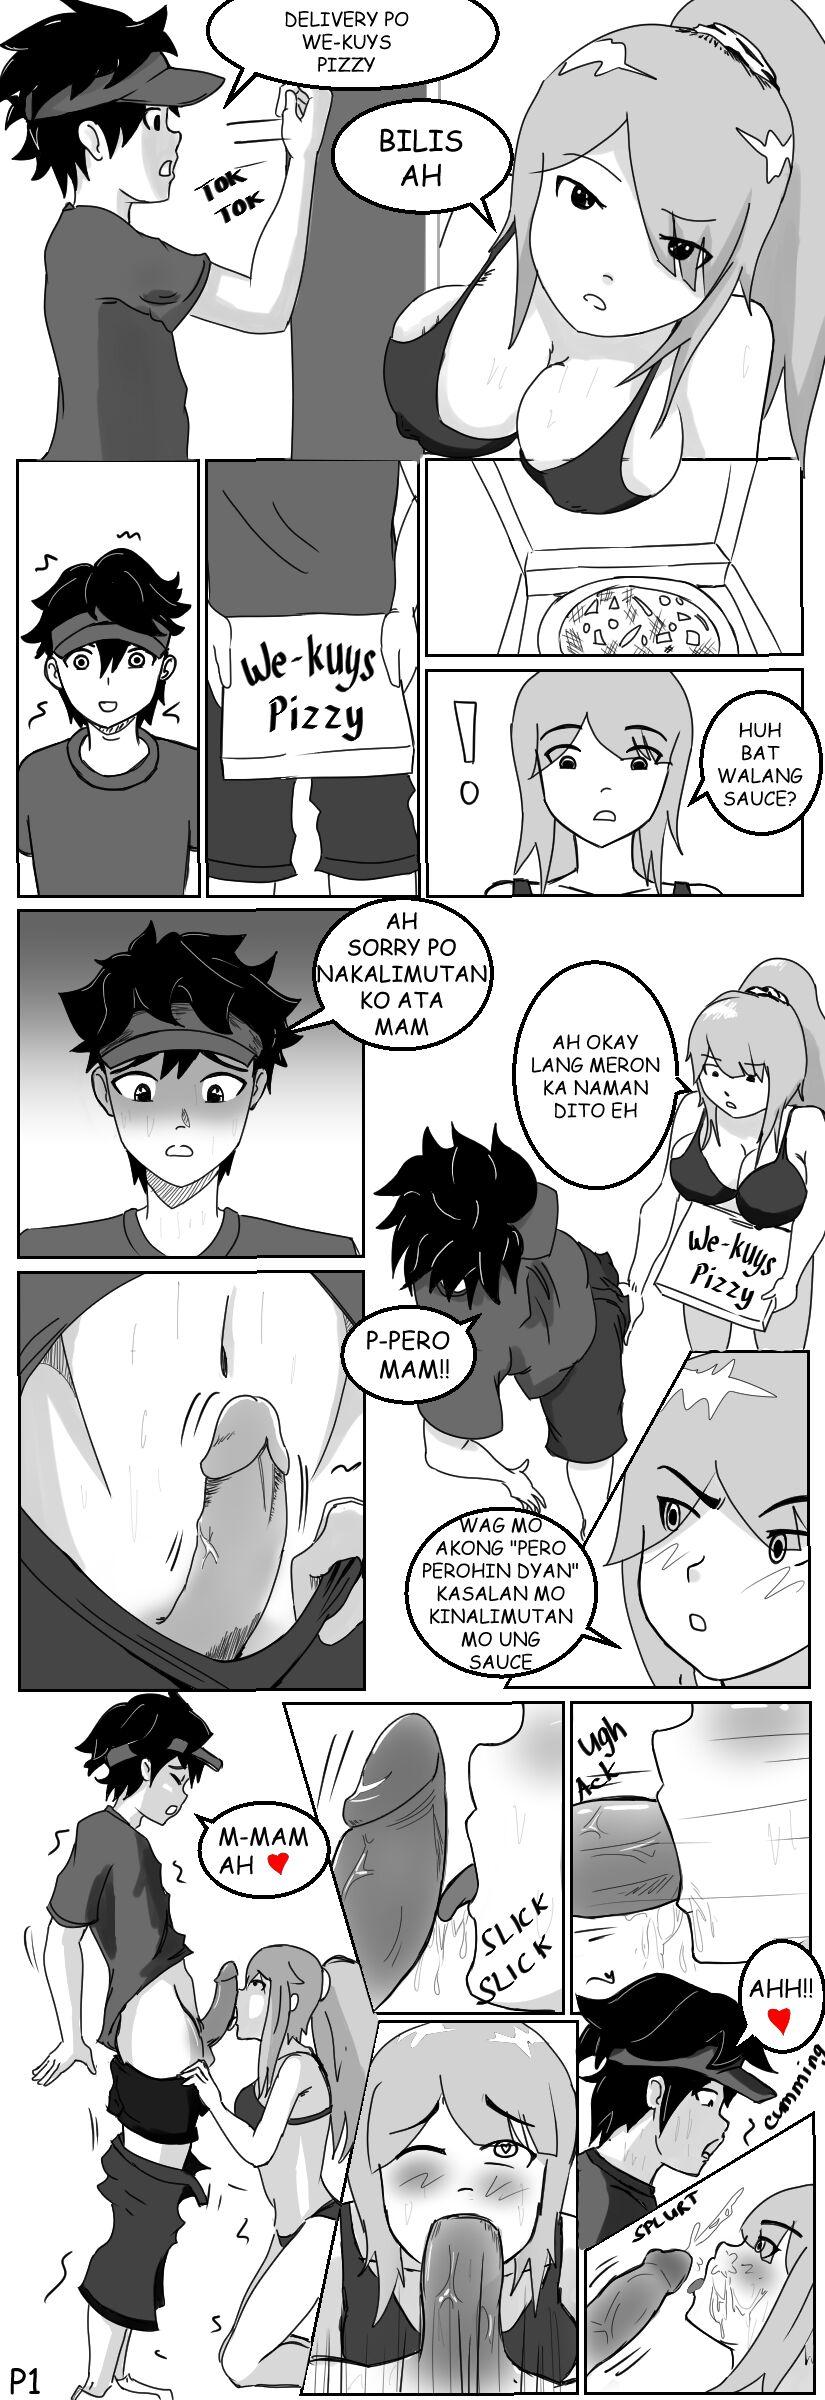 Teenage pIZZa dELIVERy Whipping - Page 1